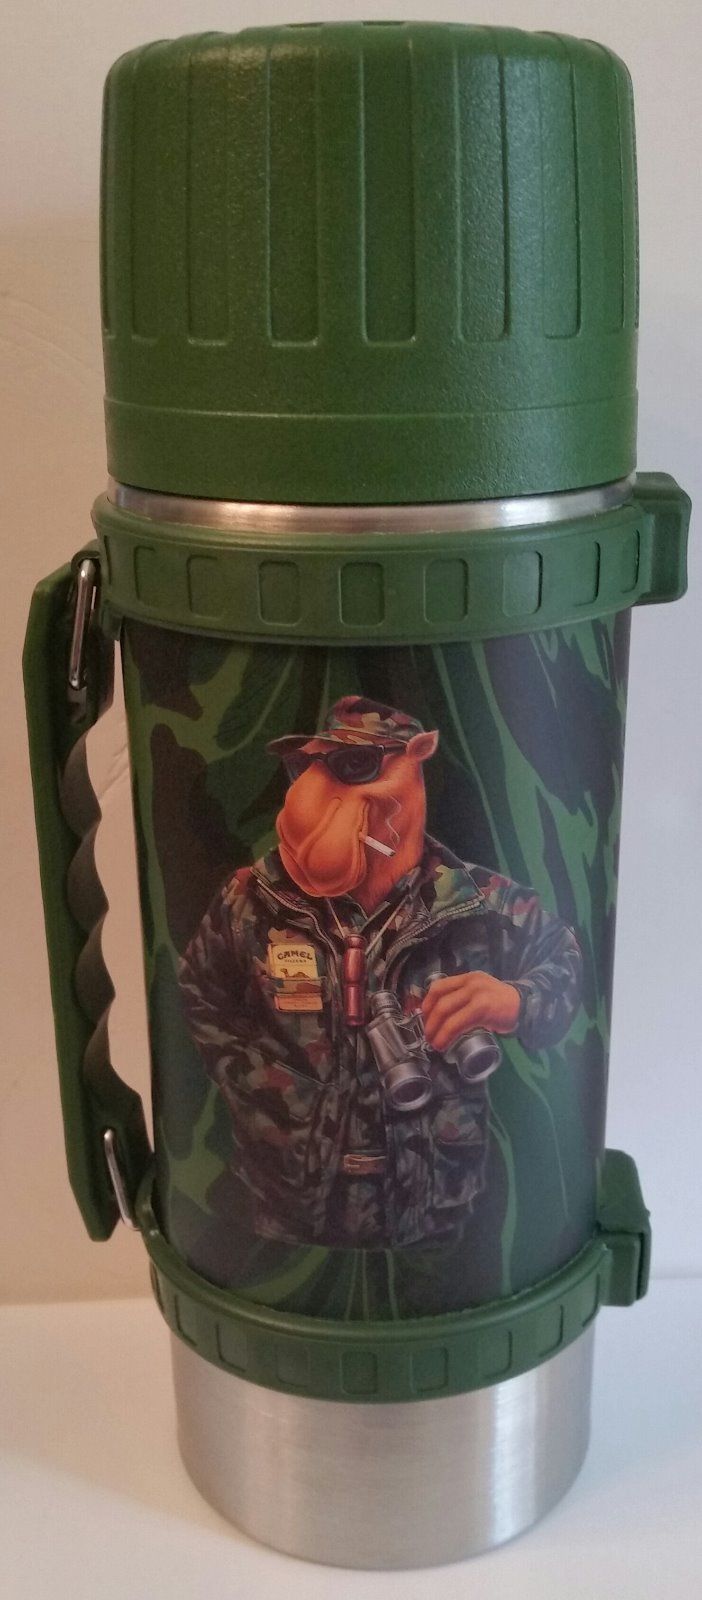 https://jackrabbitsvintage.com/wp-content/uploads/imported/4/Thermos-Joe-Camel-Camo-Metal-Fish-and-Game-Club-New-in-Box-123154366844-4.JPG